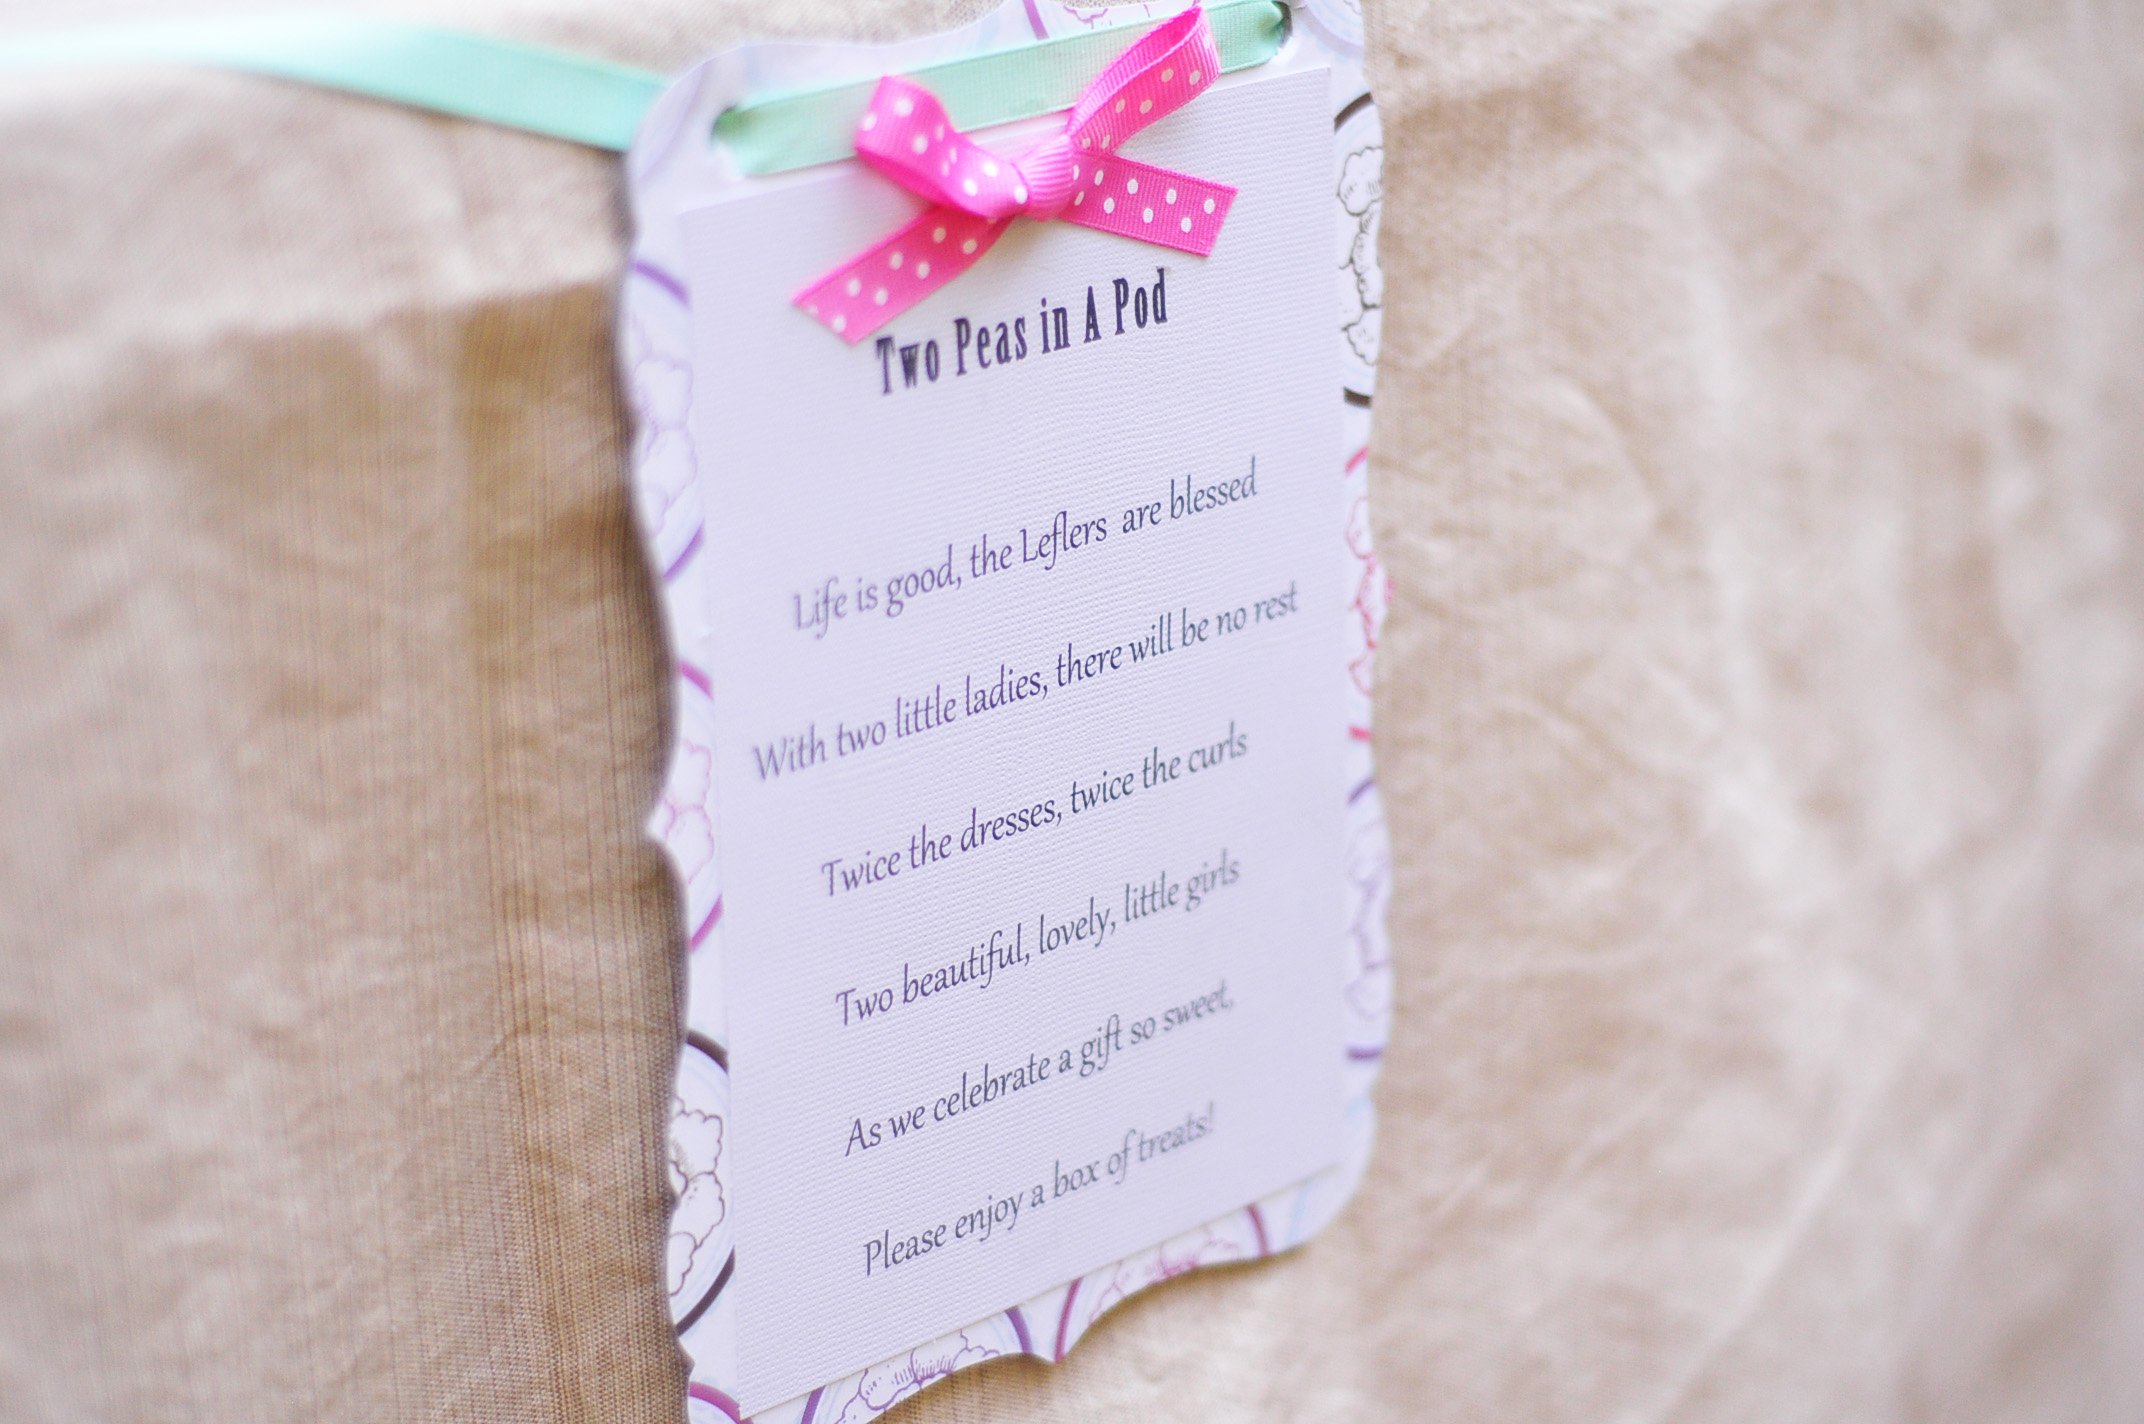 baby shower poems for twins